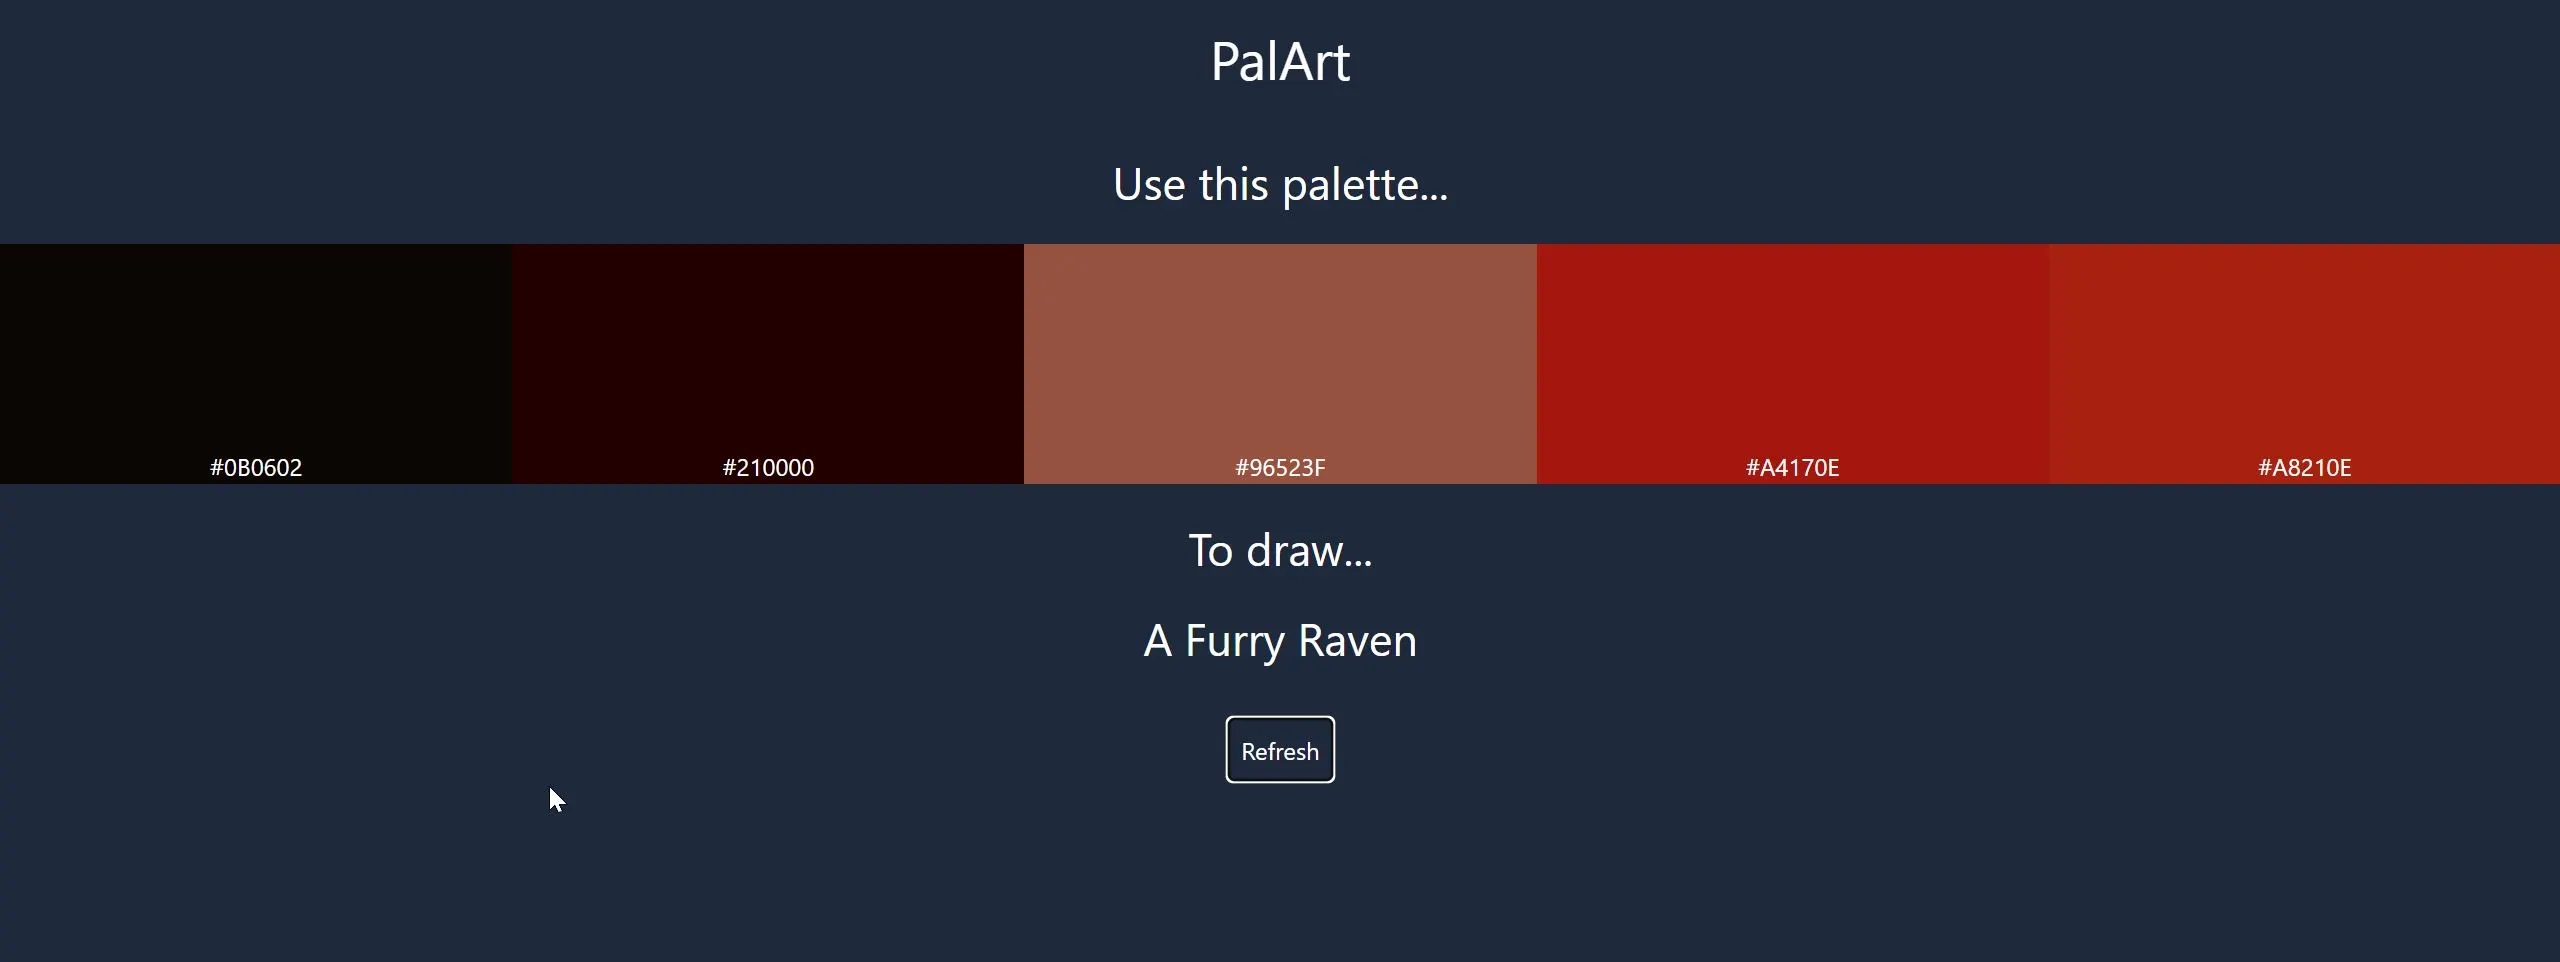 PalArt A painting practice prompter